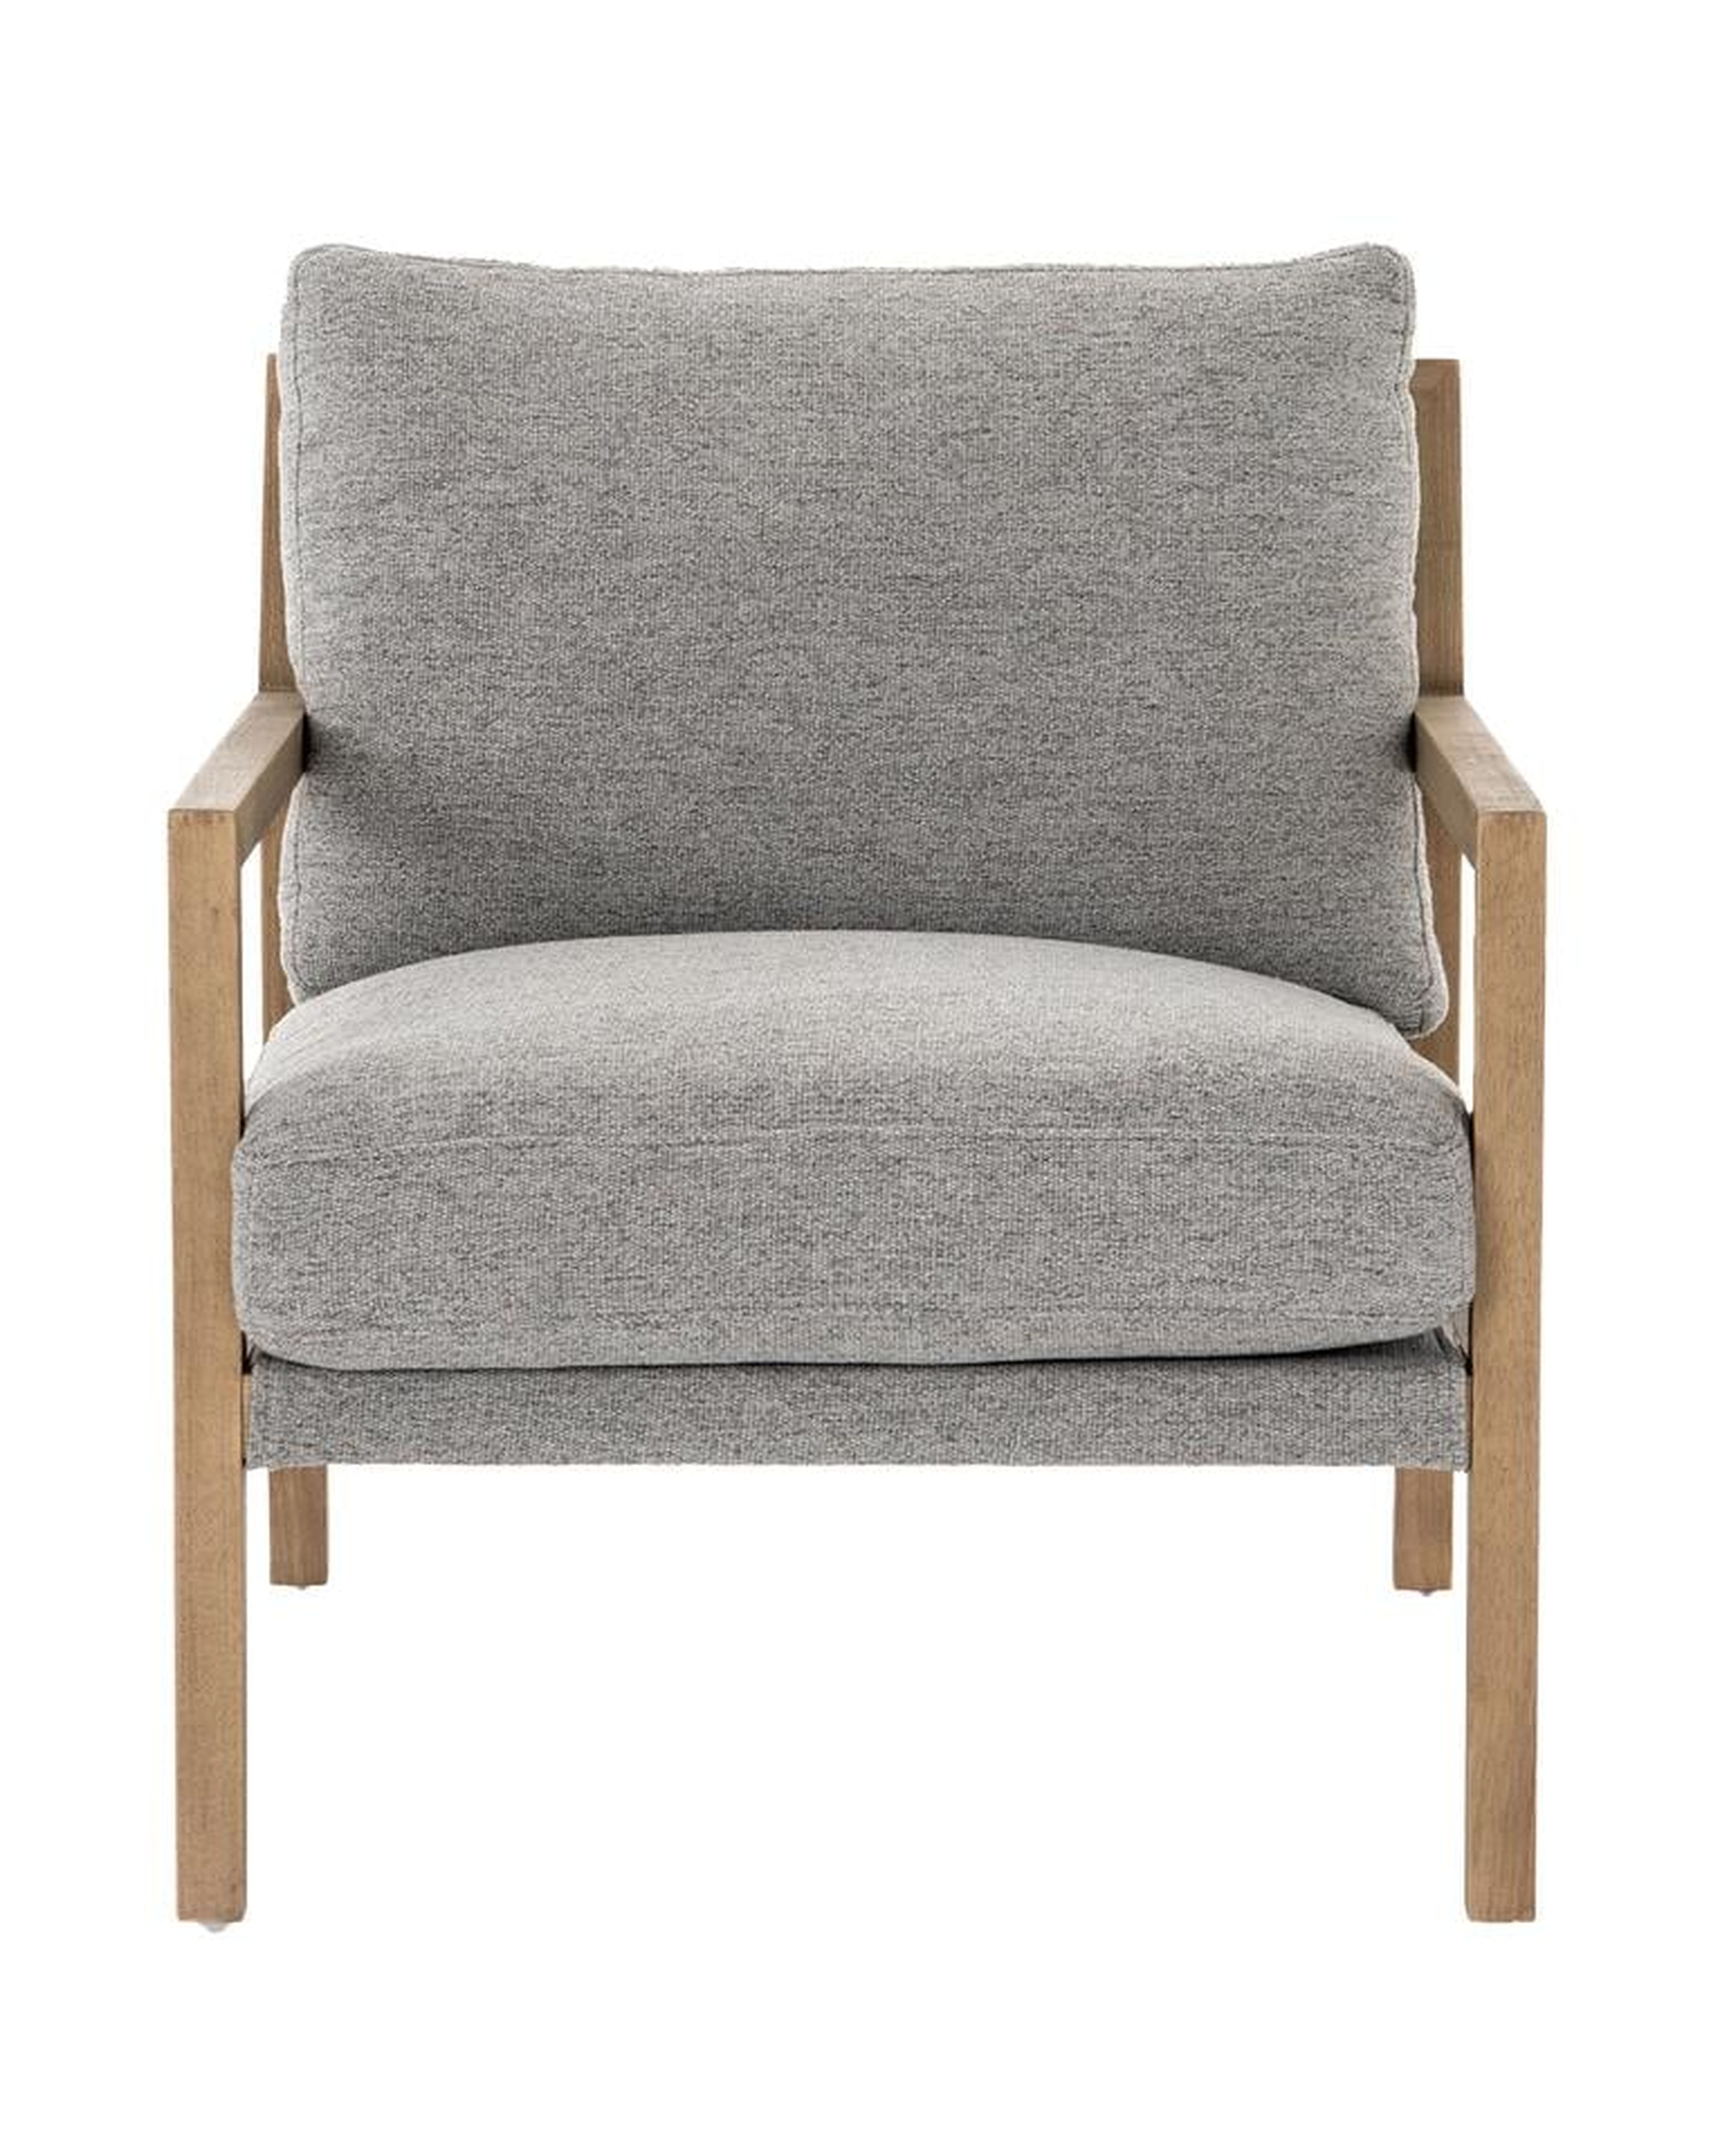 Lucy Chair, Speckled Gray - McGee & Co.